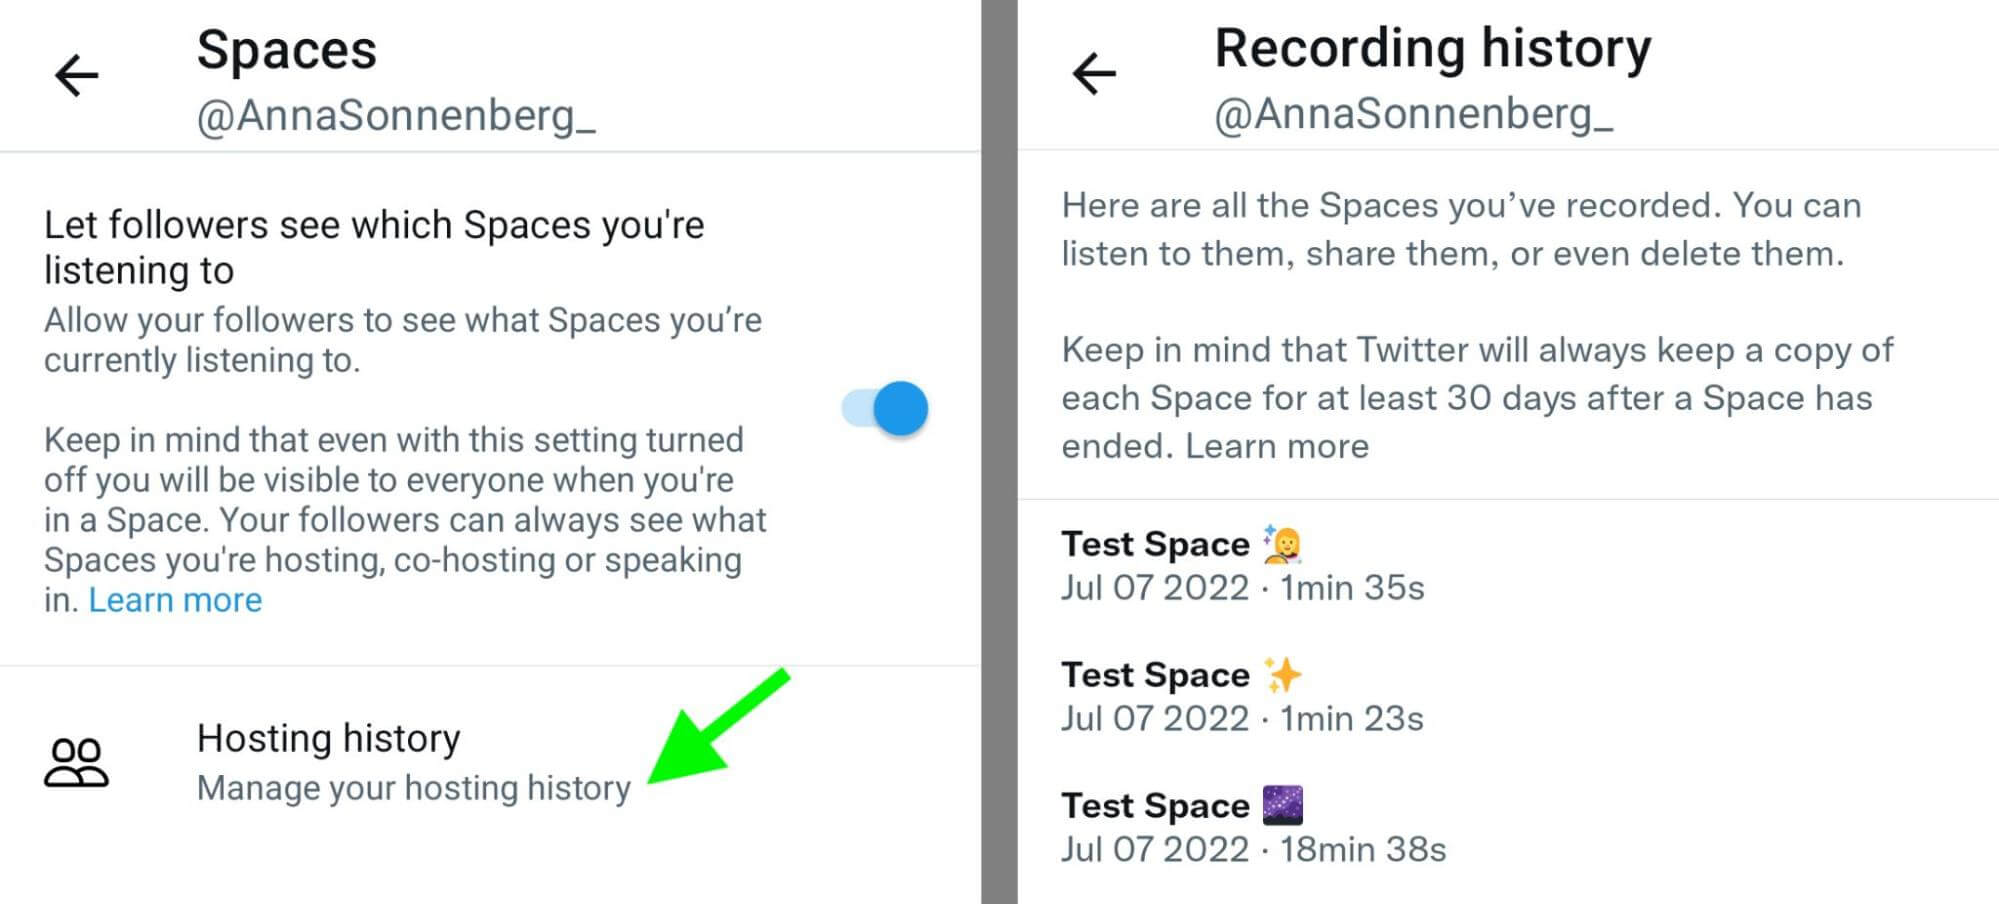 how-to-create-twitter-spaces-review-space-analytics-recording-history-hosting-annasonnenberg_-step-24